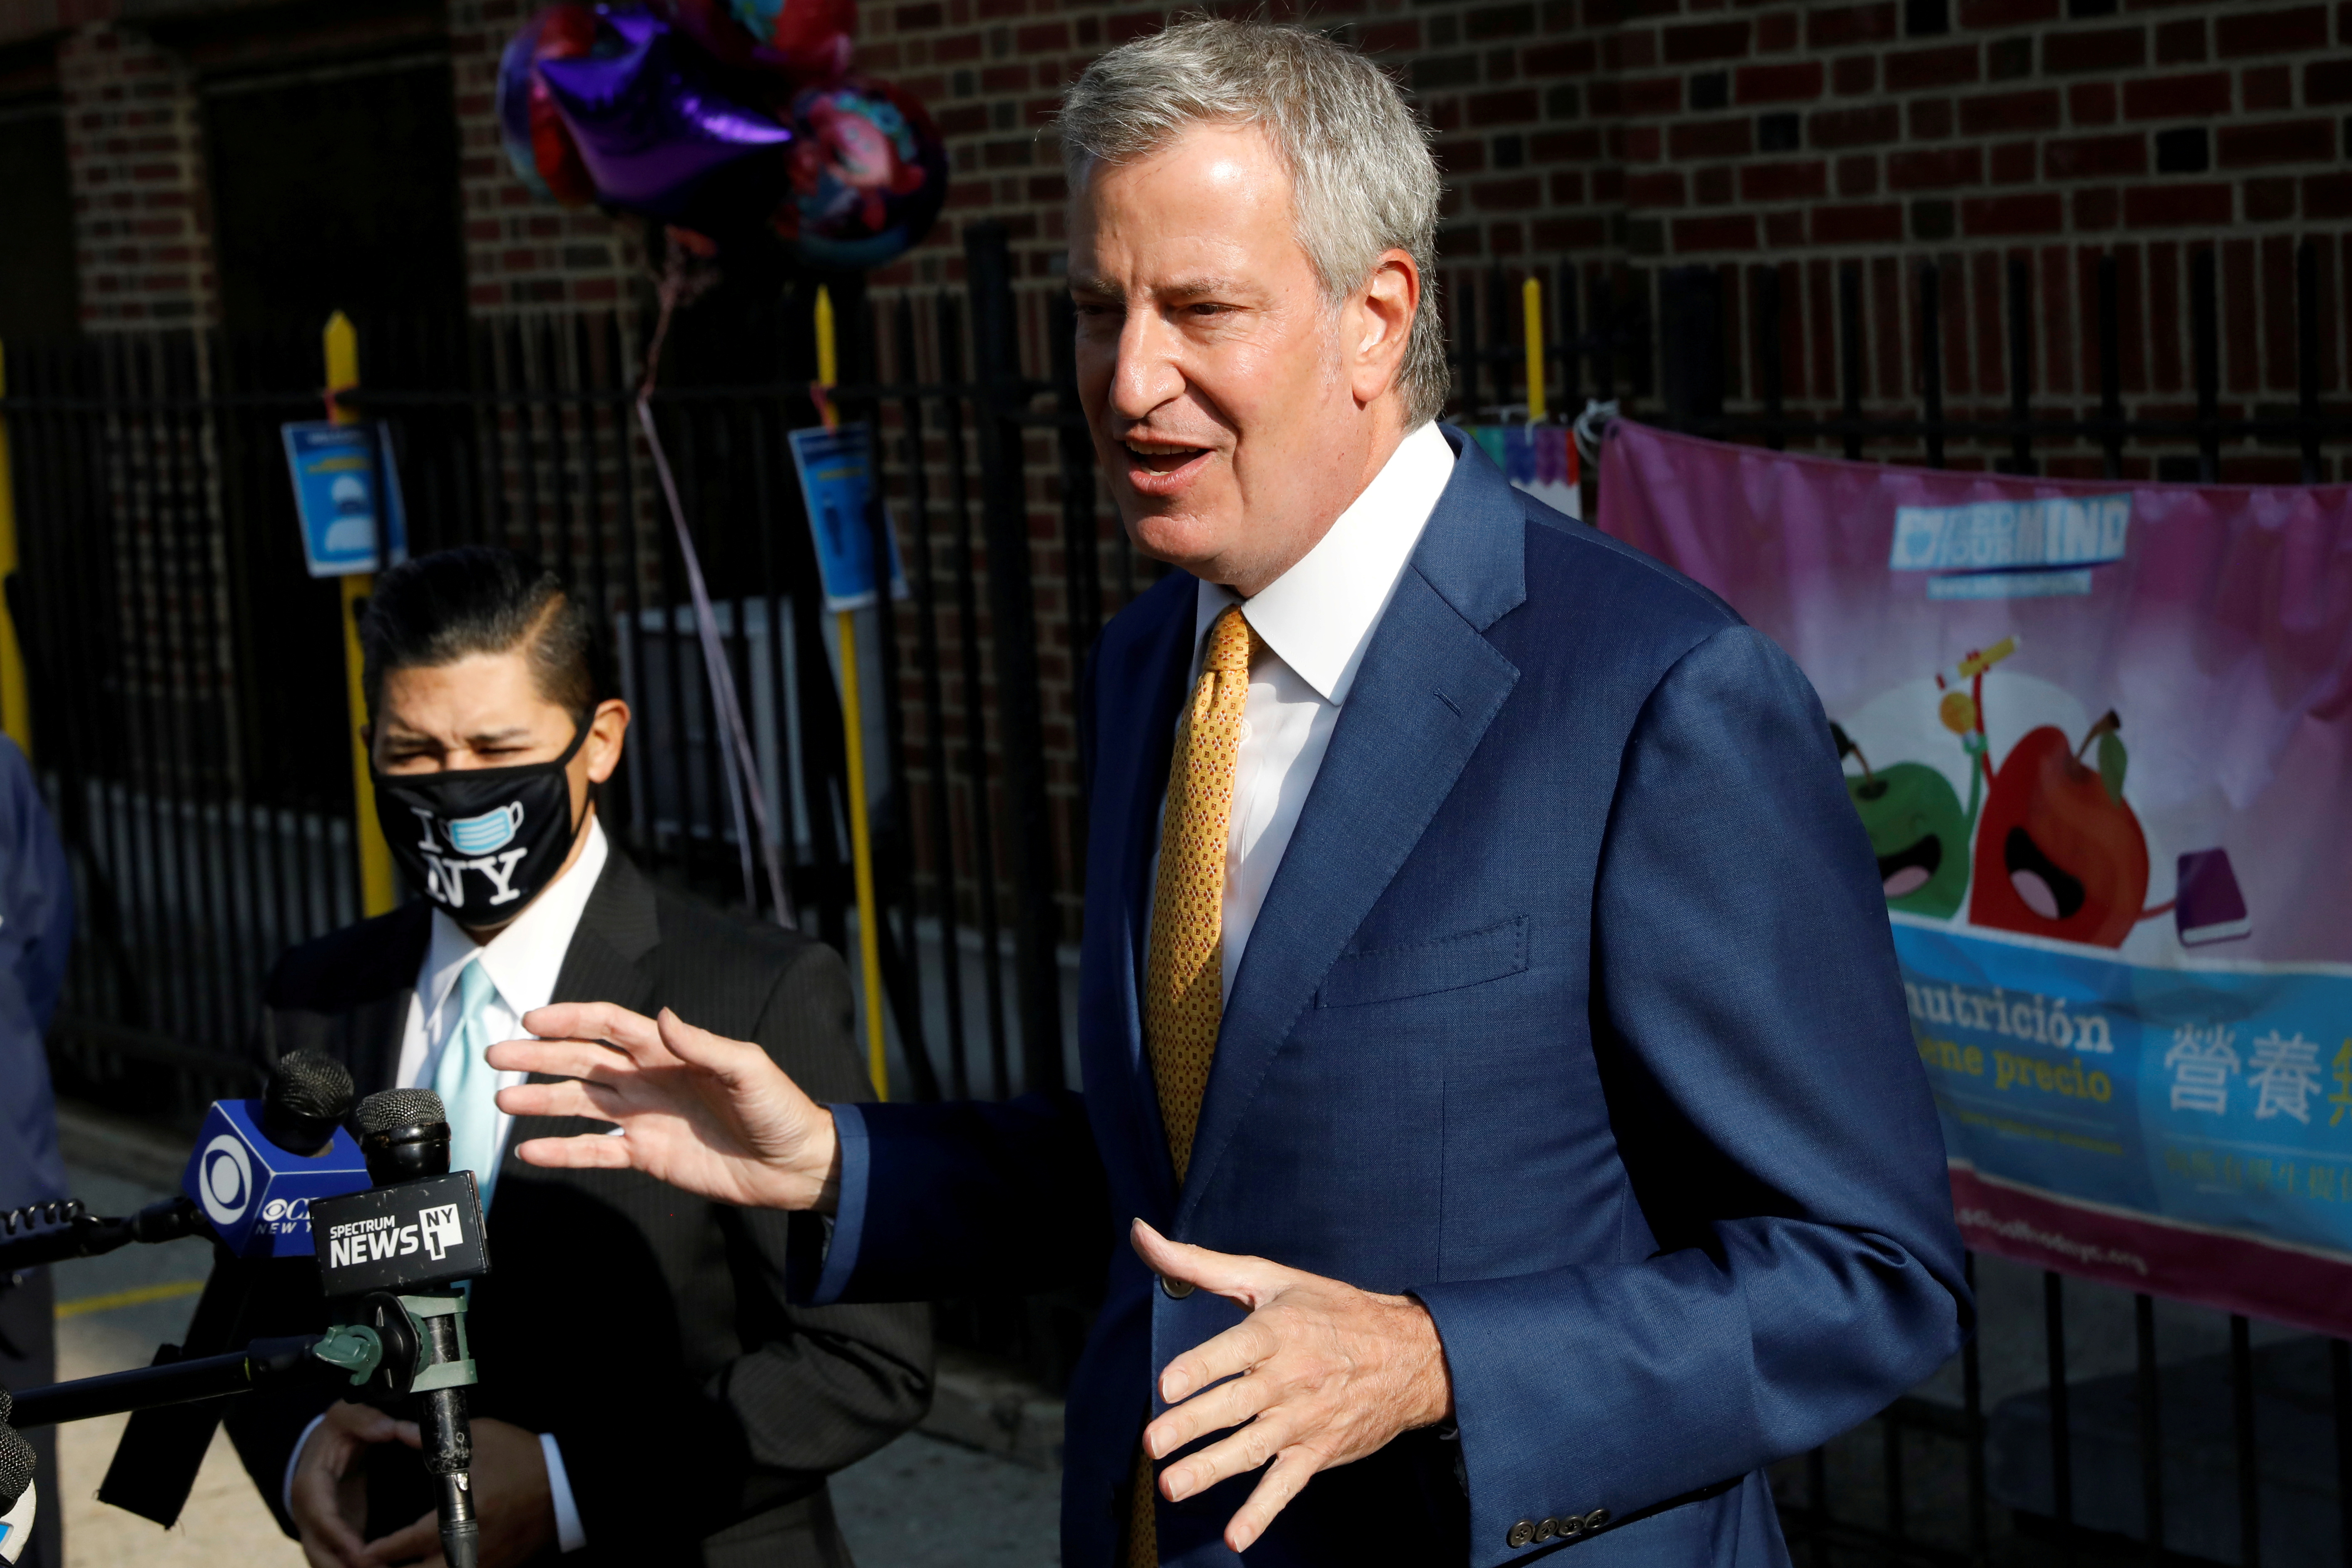 New York City Mayor Bill de Blasio, speaks during a news conference after greeting students for the first day of in-person pre-school following the outbreak of the coronavirus disease (COVID-19) in the Queens borough of New York City, U.S., September 21, 2020. REUTERS/Brendan McDermid 